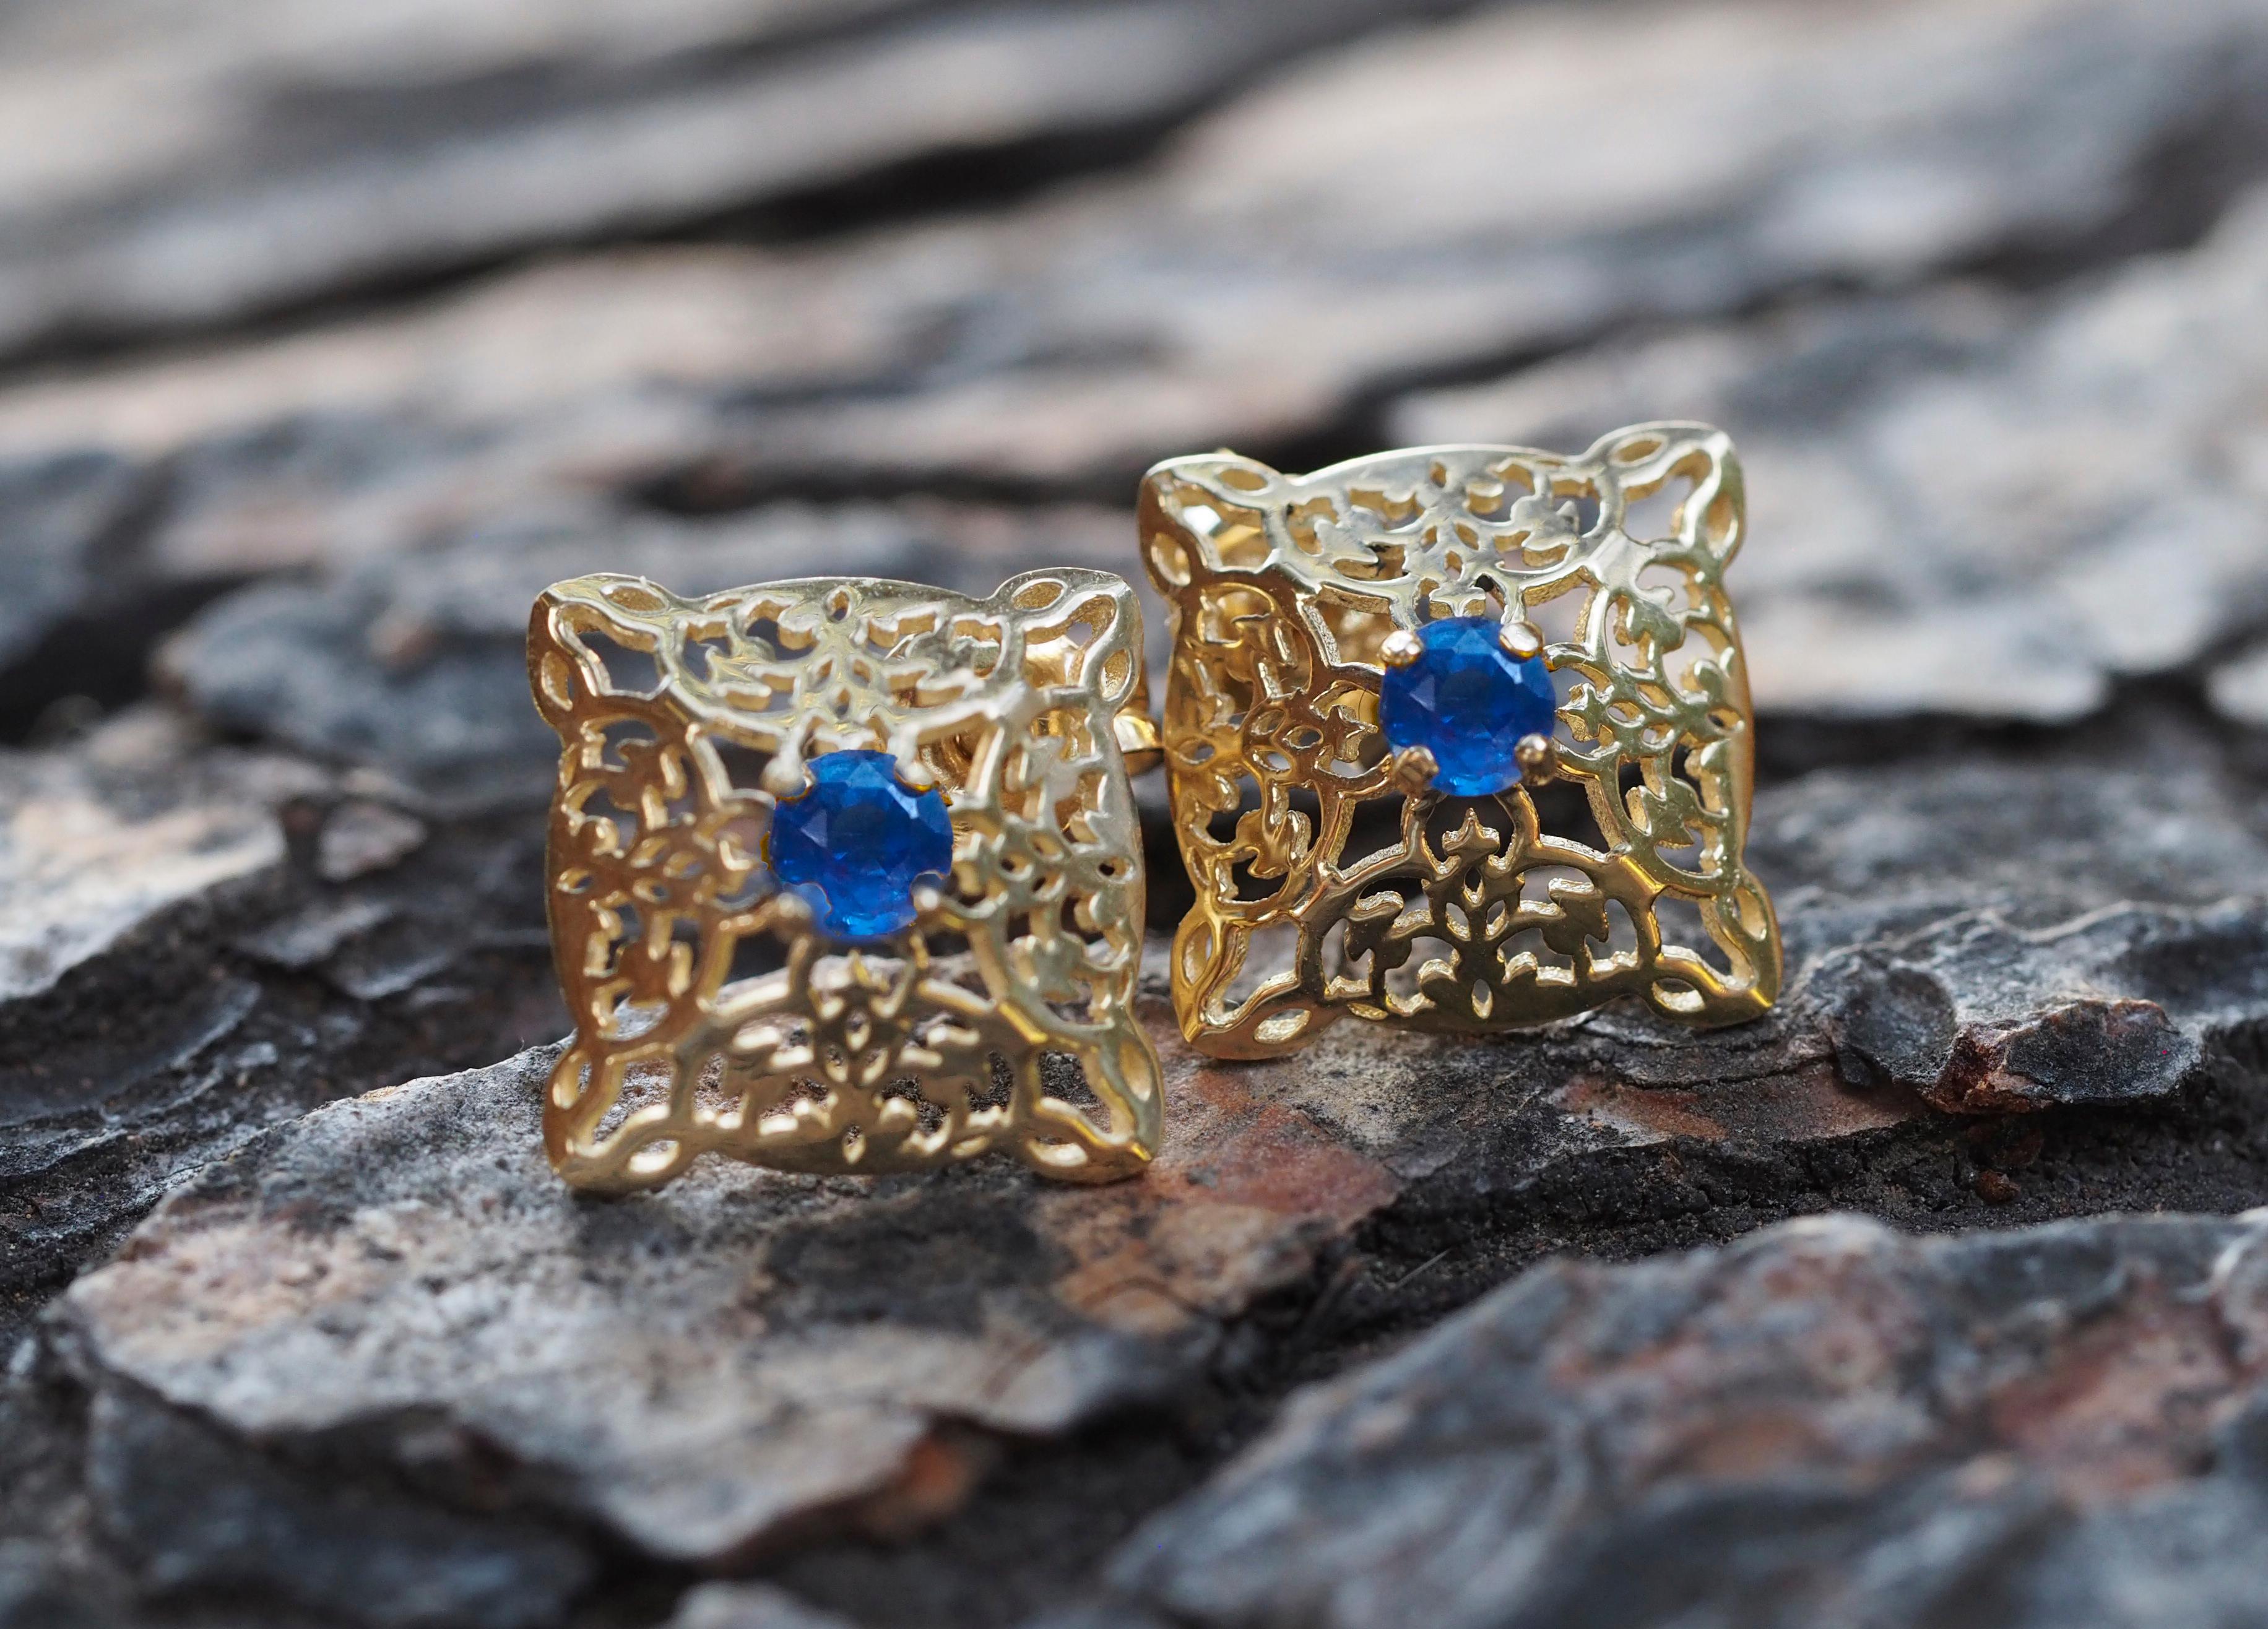 Sapphire stud earrings in 14 k gold. 
Vintage sapphire earrings. Oriental earrings studs. Natural sapphire studs. Round blue sapphire studs.

Metal: 14k gold.
Weight: 2.0 g.
Size 16 x11.5 mm.

Set with sapphires - 2 pieces, color - blue
round cut,